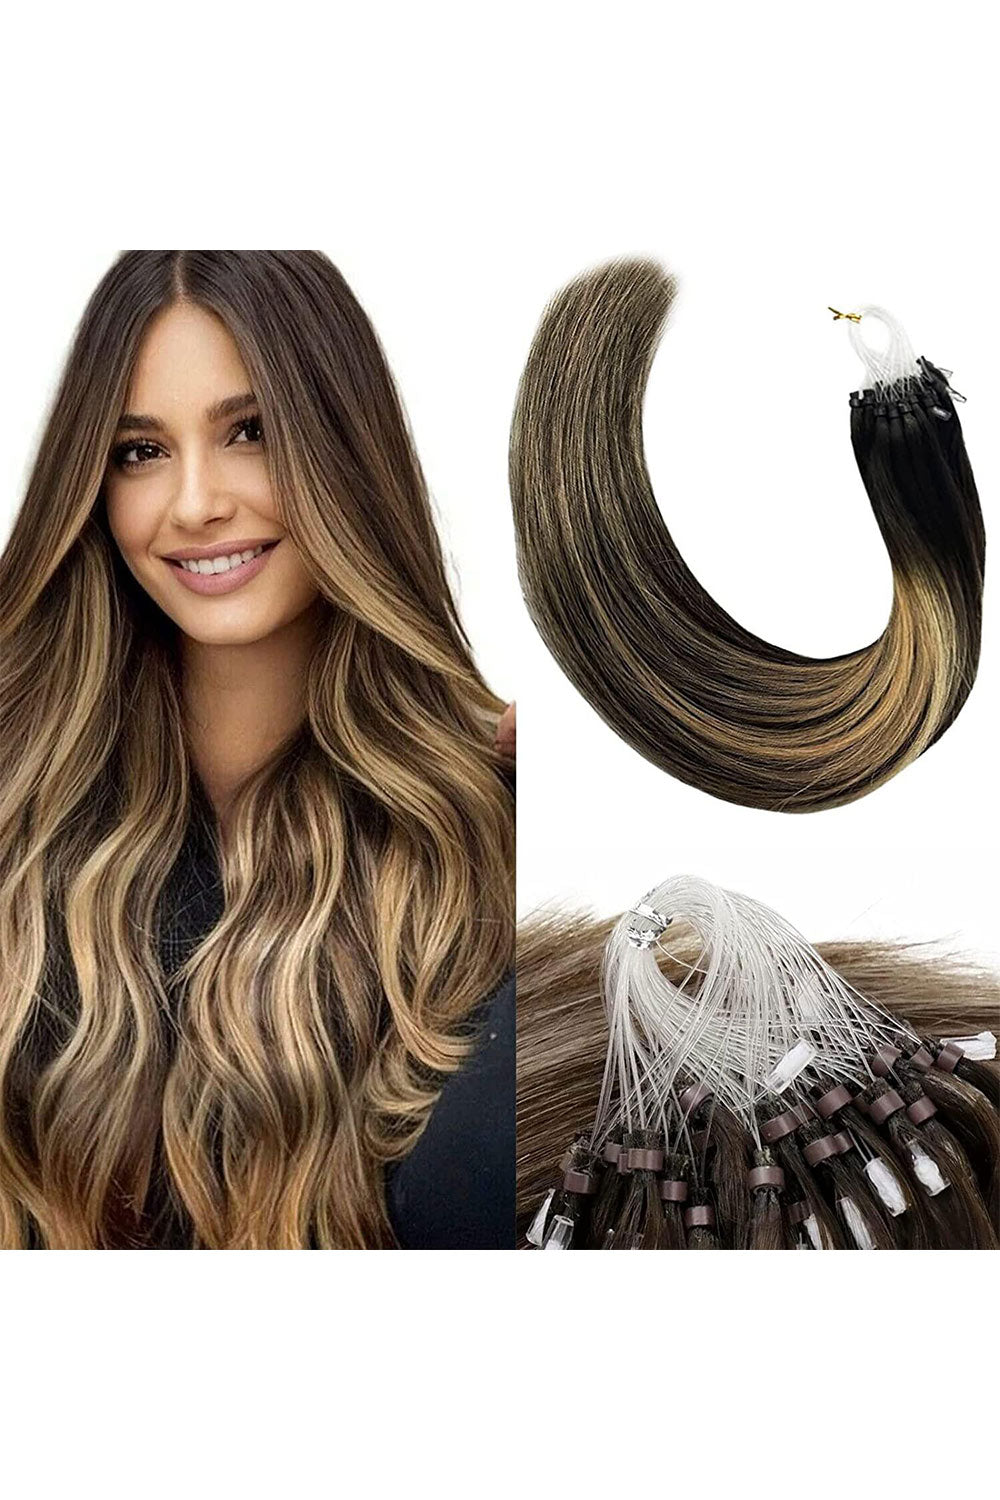 Colored Micro Link Hair Extension Black and Grey, Blonde and Brown